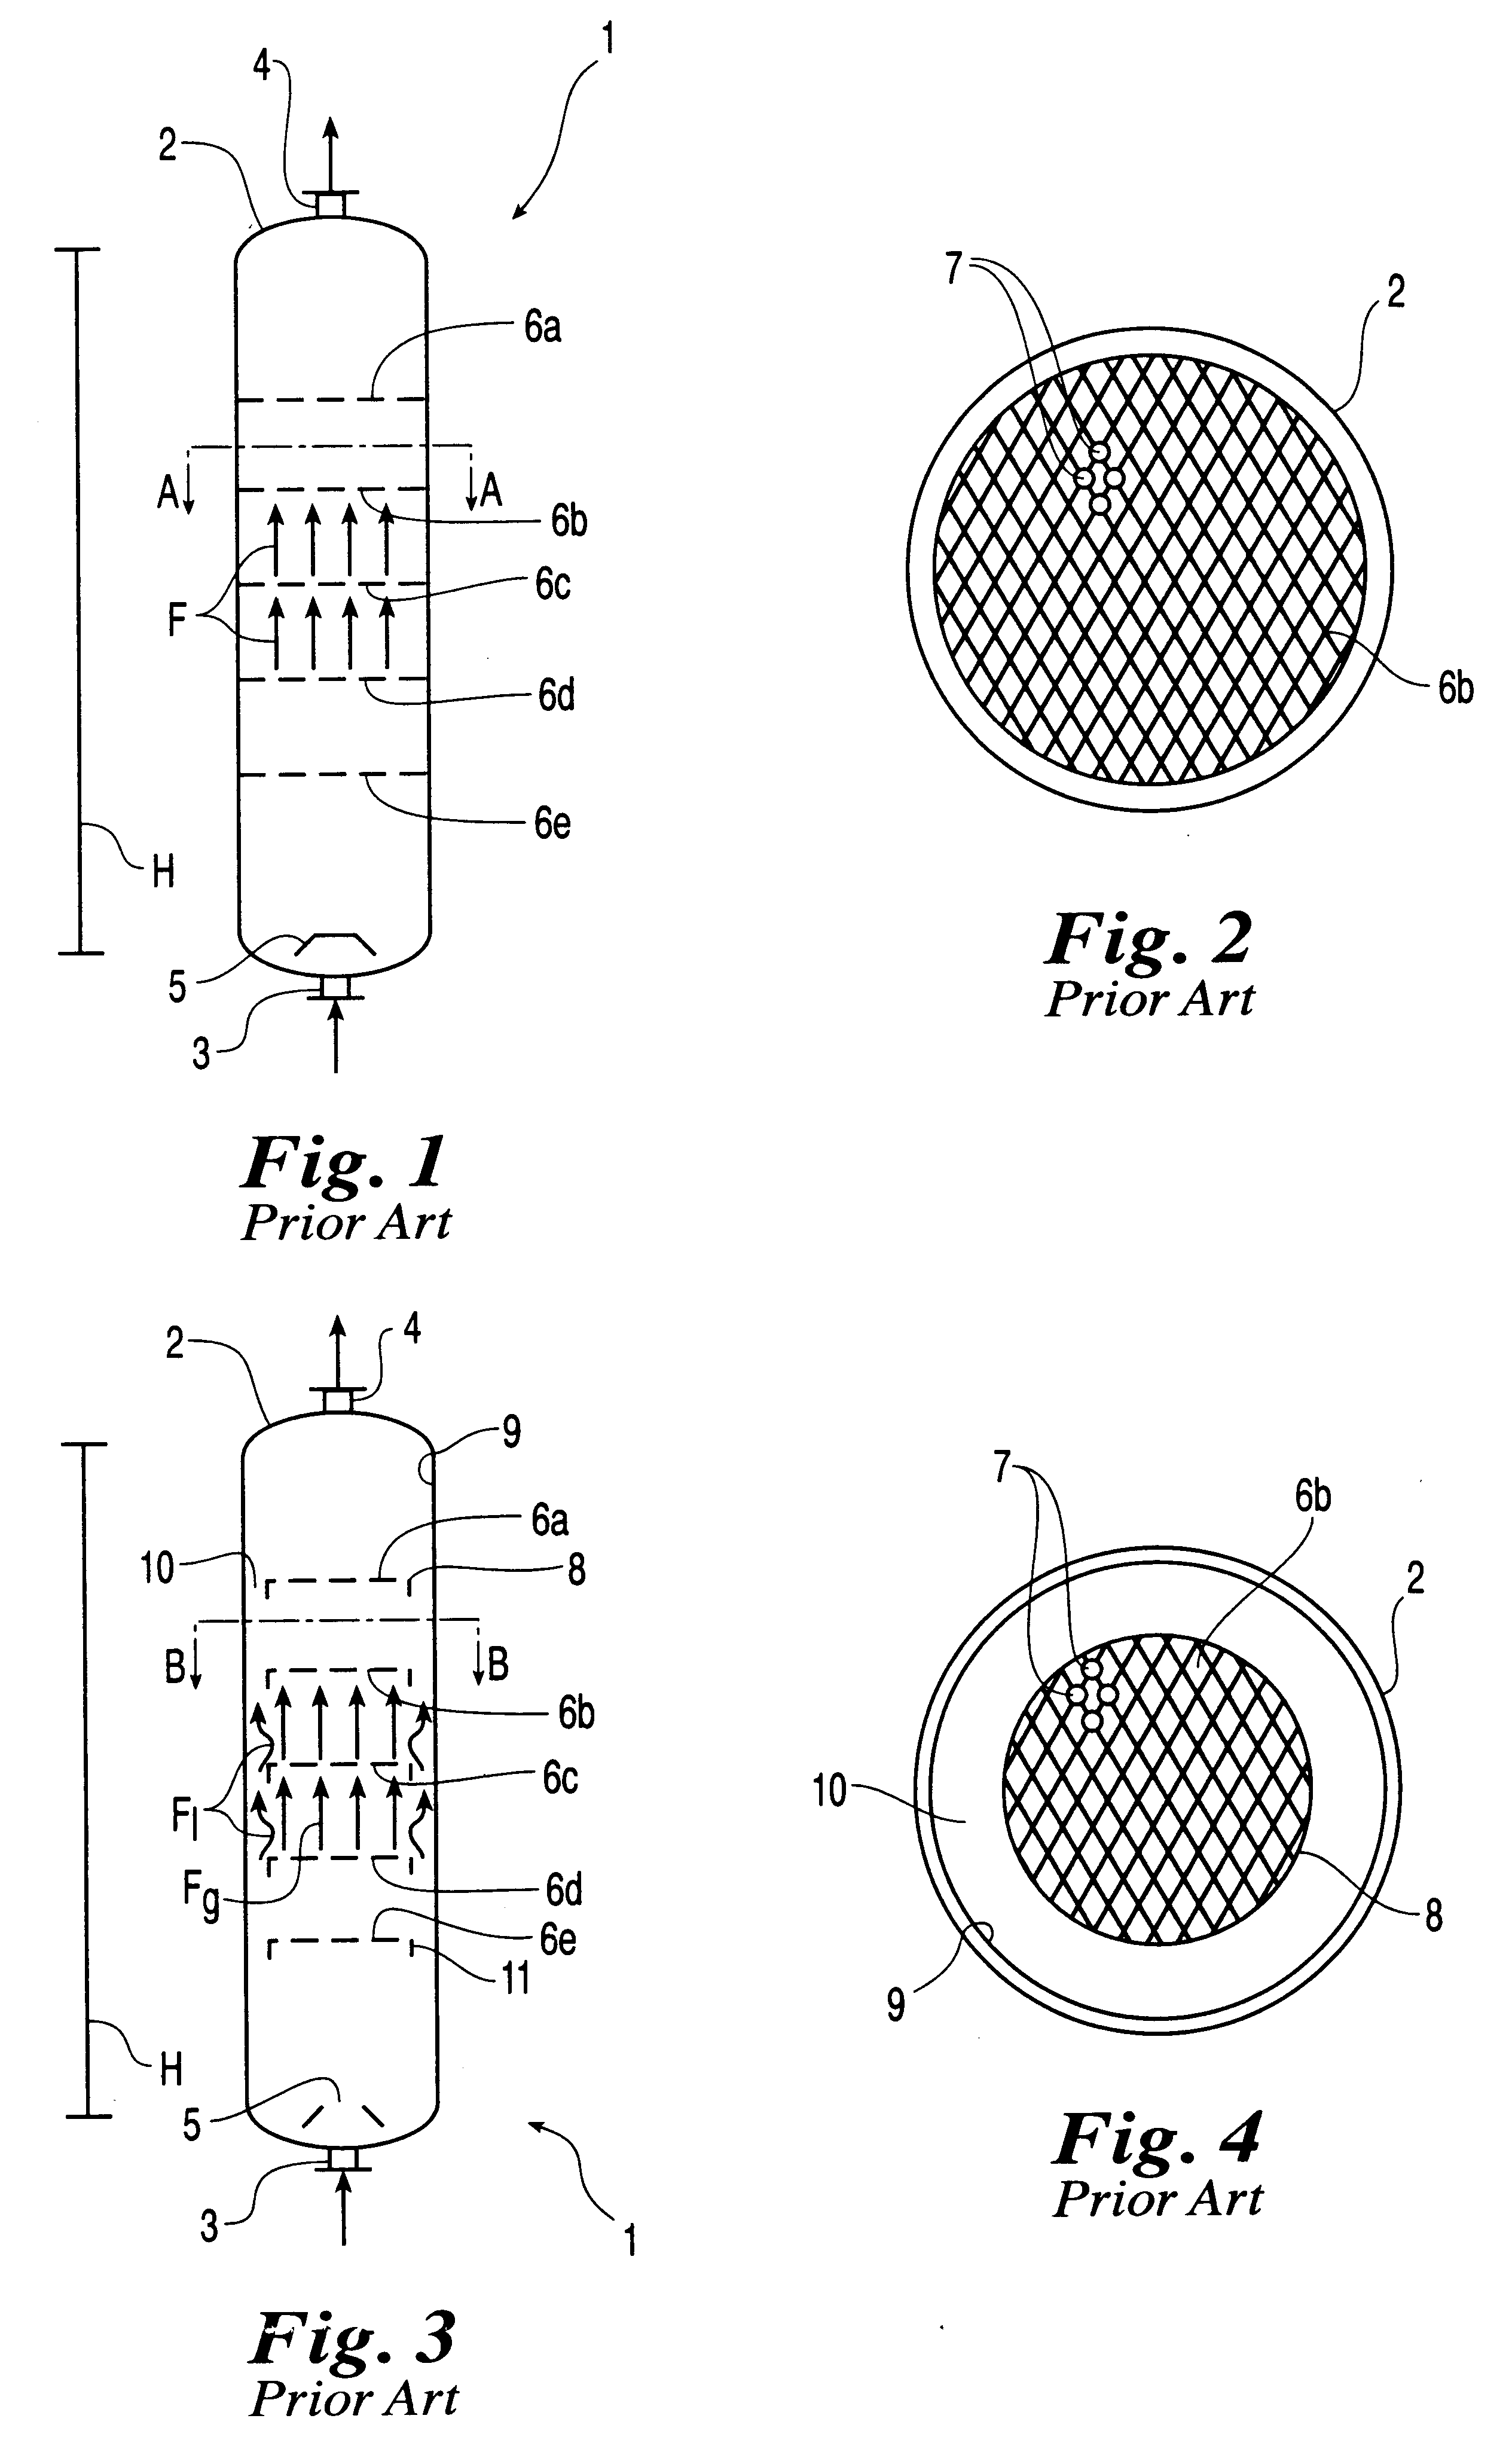 Reactor for two-phase reactions, in particular for urea synthesis at high pressure and temperature